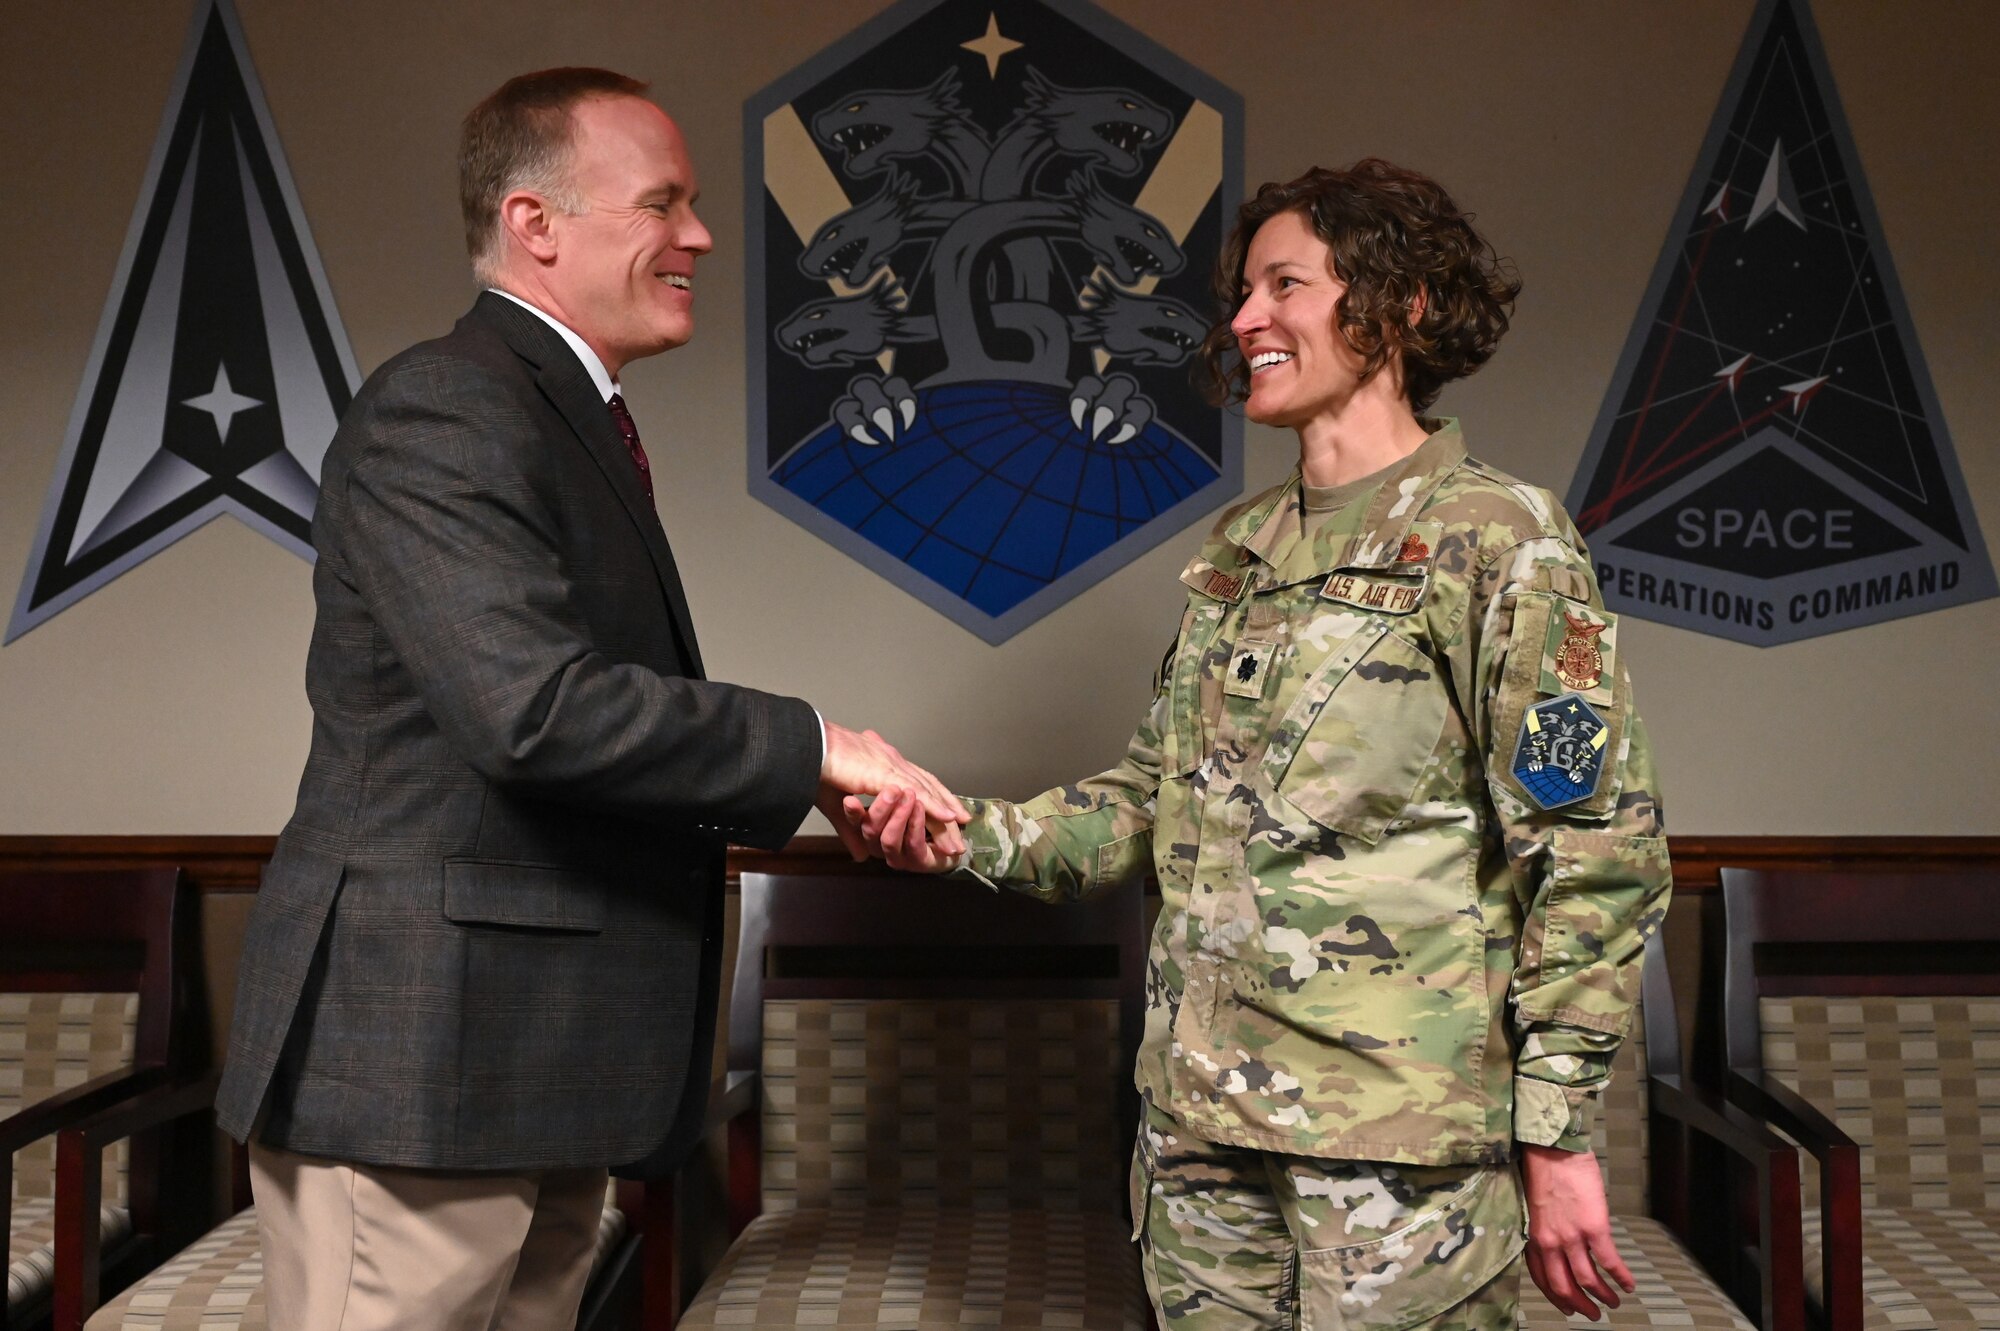 From the left, Dr. Brian Kehl, Space Operations Command Deputy to the Commanding General – Support, coins U.S. Air Force Lt. Col. Erica Tortella, commander of the 21st Civil Engineer Squadron, for her support in achieving the 2023 Commander in Chief’s Annual Award for Installation Excellence for Space Base Delta 1 at Peterson Space Force Base, Colorado on June 28, 2023. The coin reads, “presented by the deputy for support for superior performance, 071 Space Operations Command.” (U.S. Space Force Photo by Airman 1st Class Cody Friend)